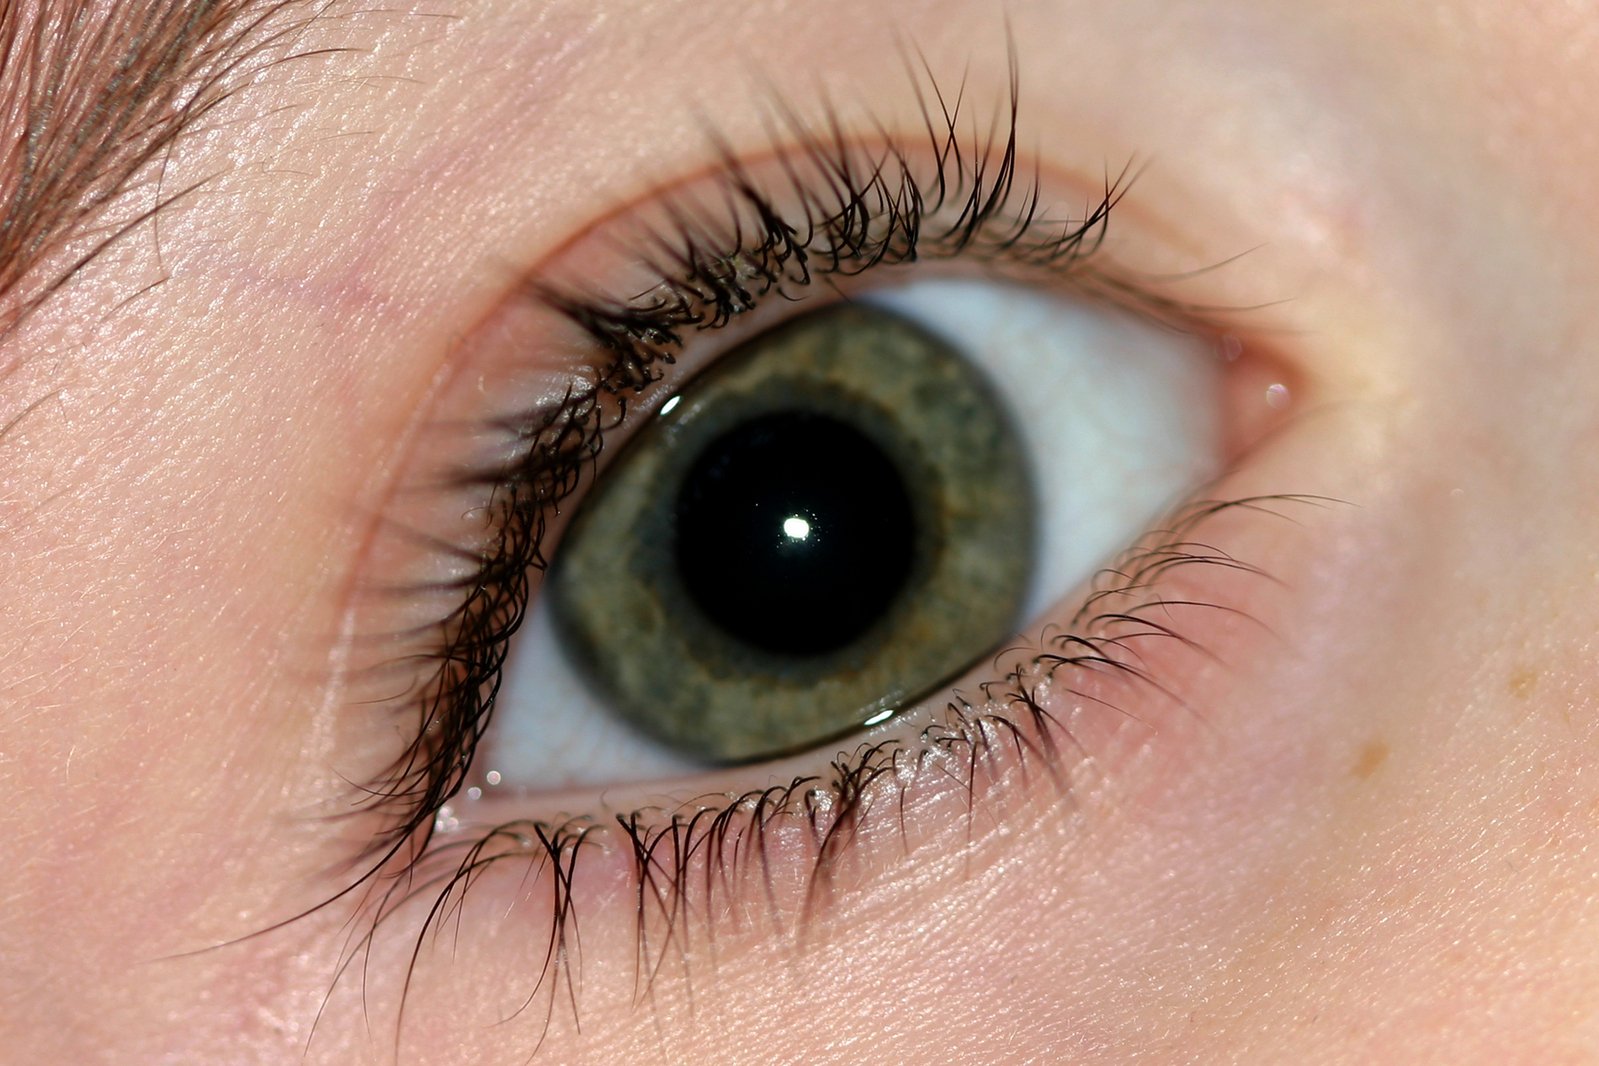 a close up view of an eye with green eyes